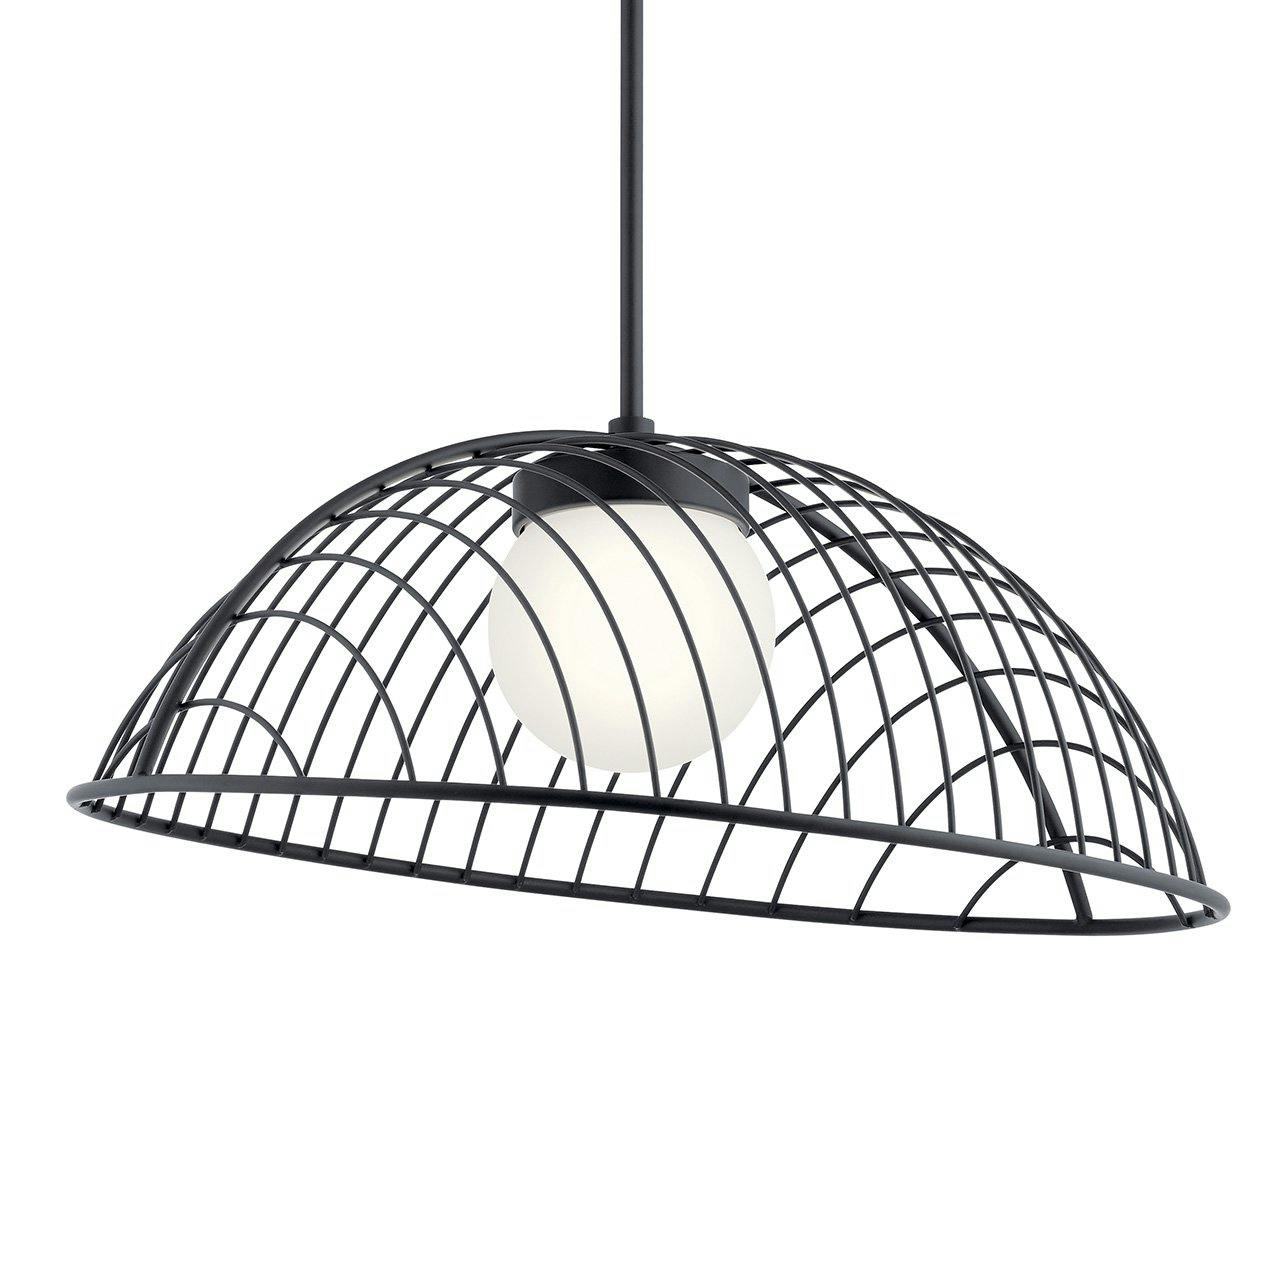 Clevo™ LED 3000K 24" Pendant Matte Black without the canopy on a white background